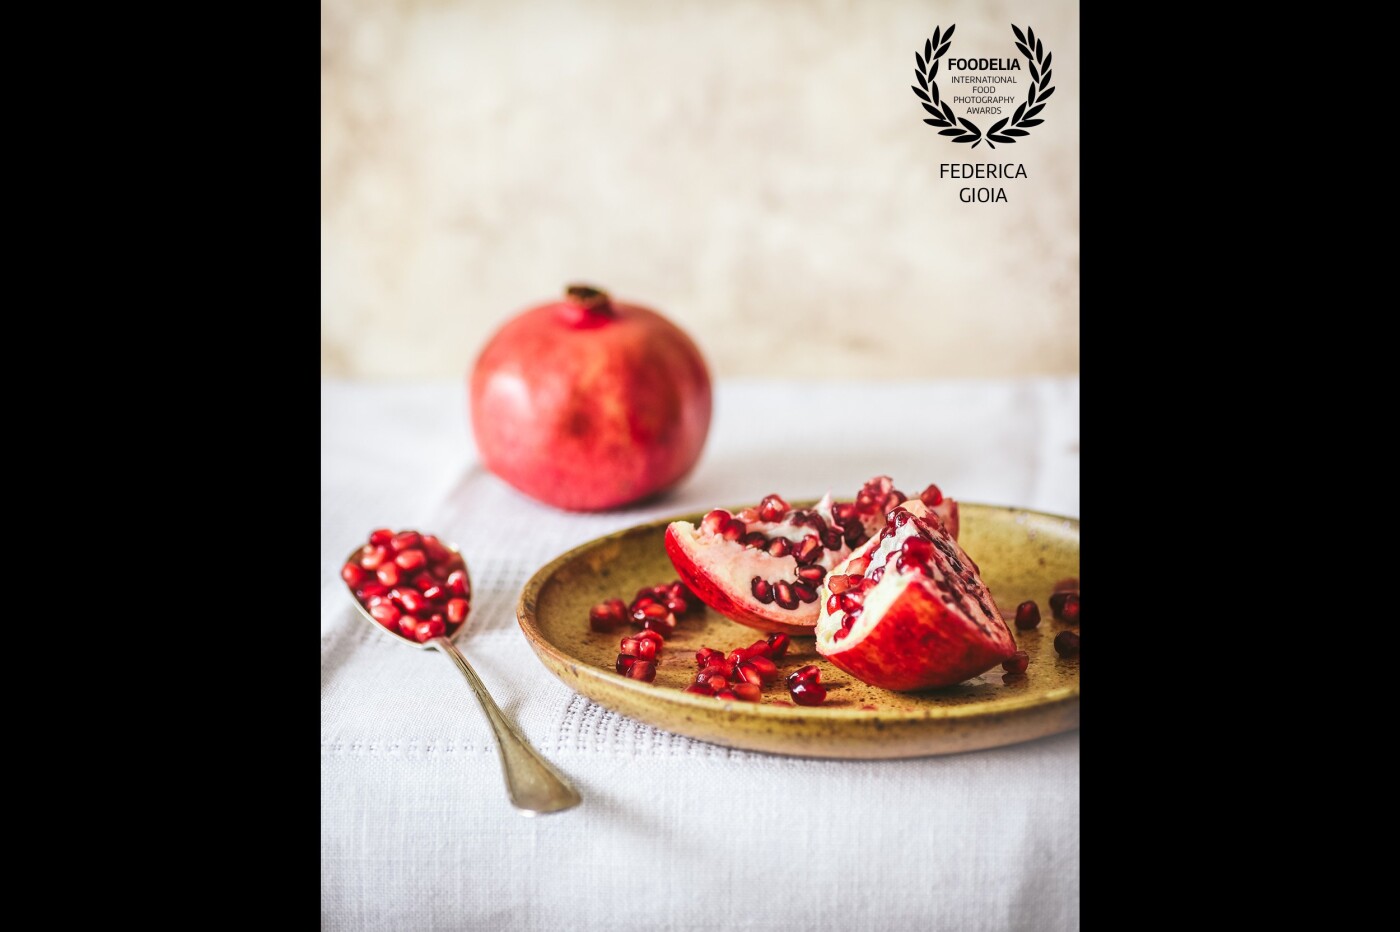 Work for Tendence Fruit, trying some light food photography and loving it for the first time. <br />
<br />
Using a 50mm f 1.8 lens and NikonD750 